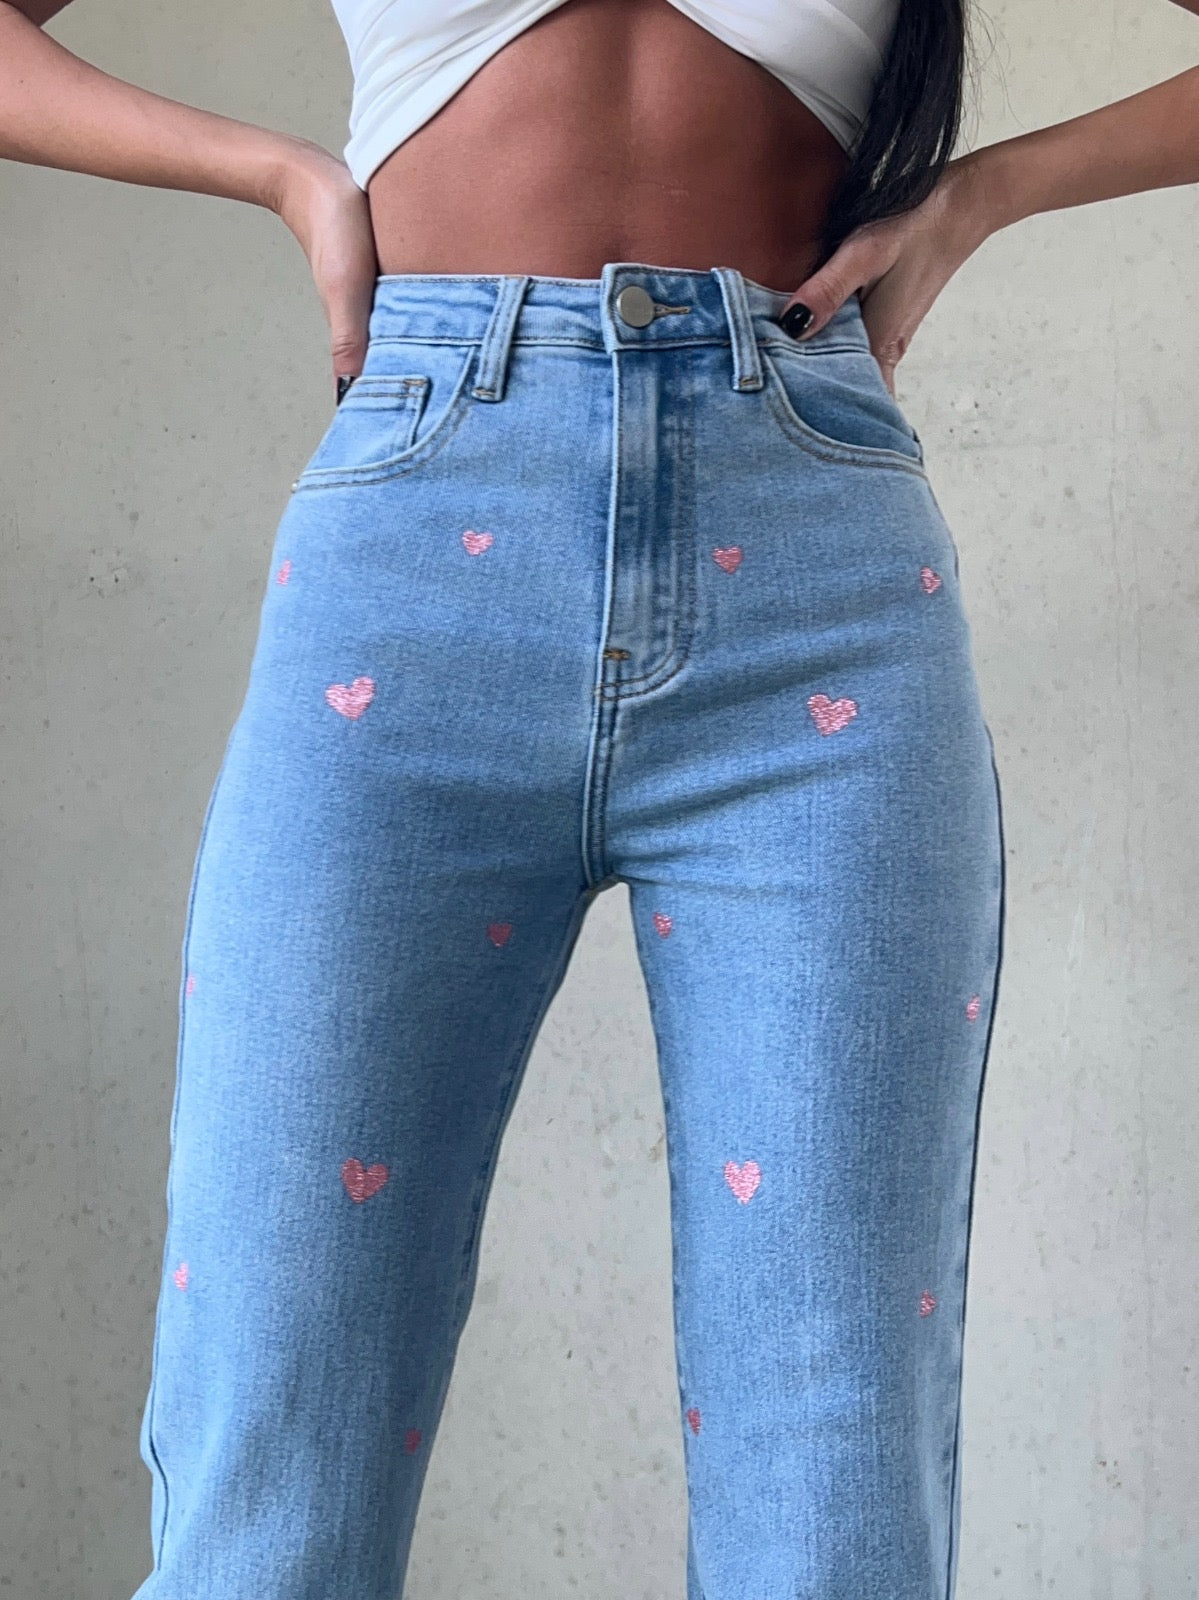 Jeans pink hearts